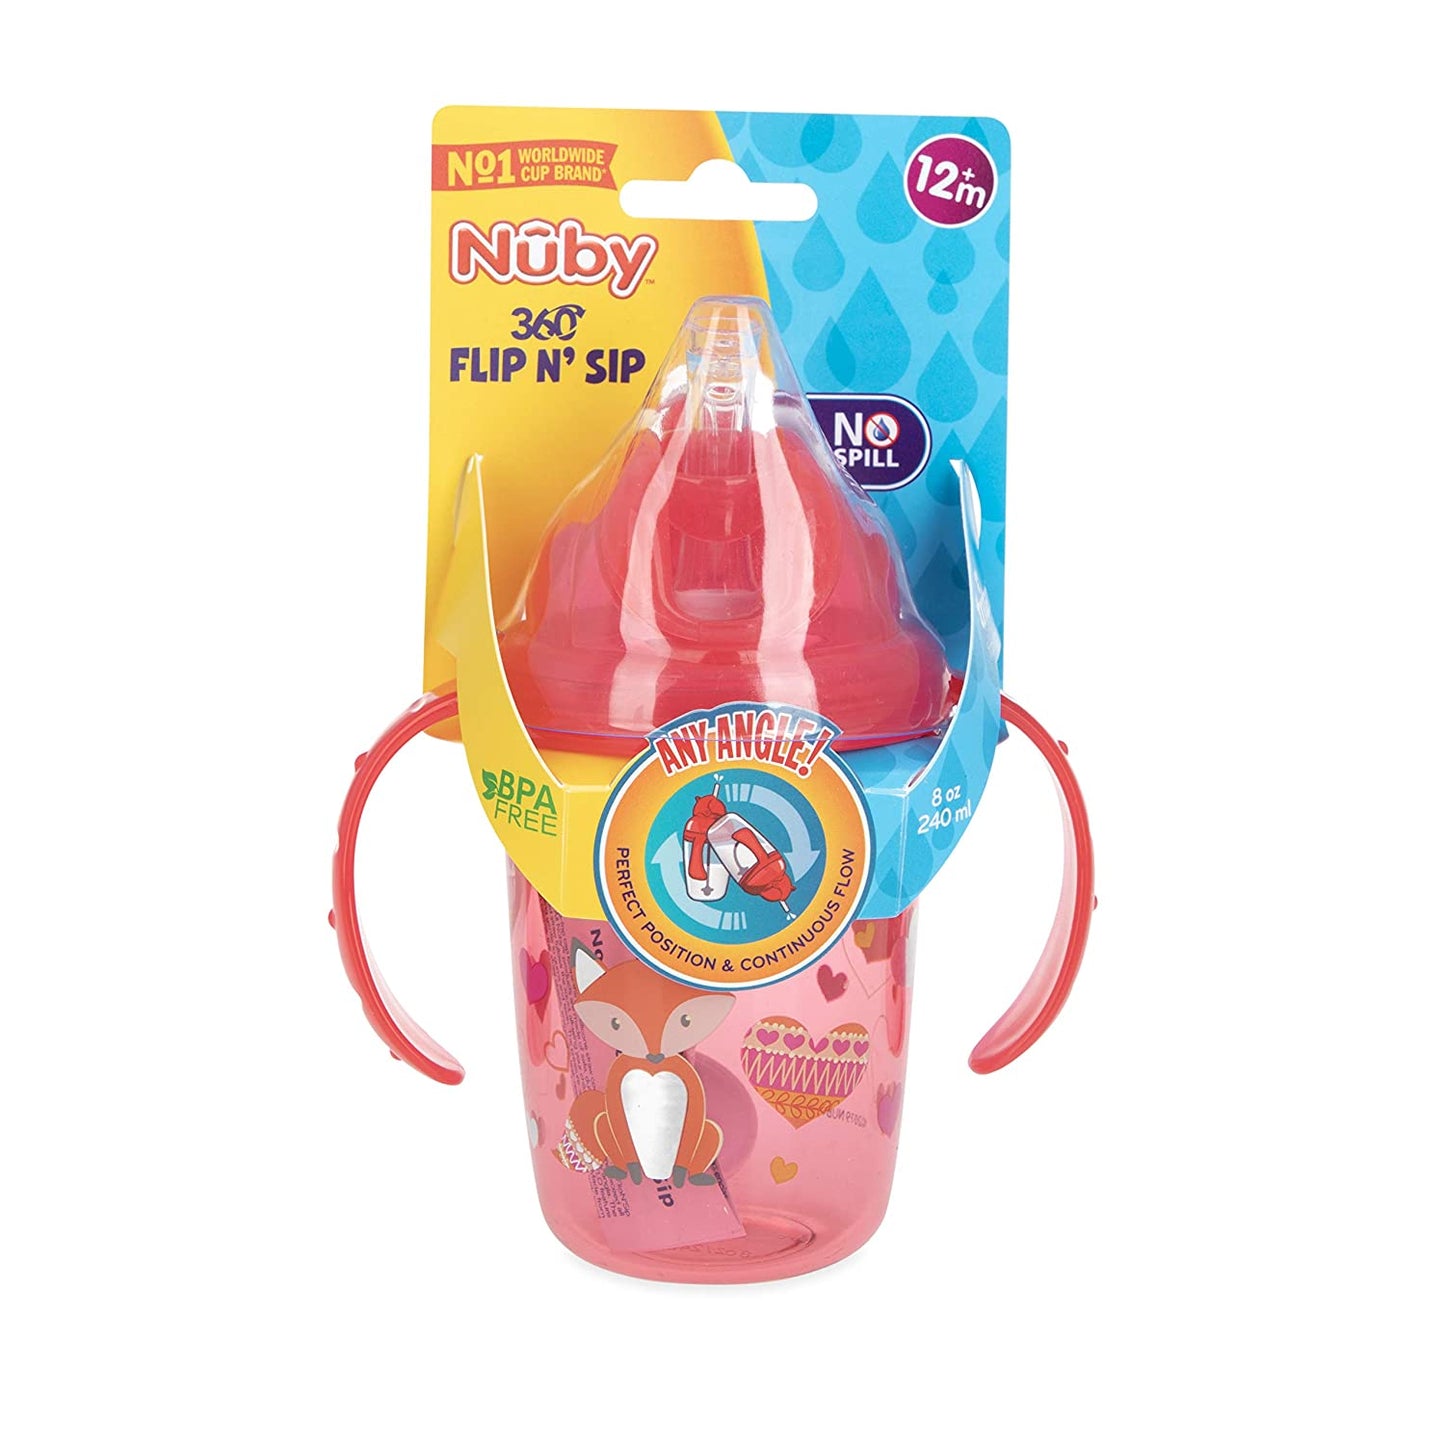 Nuby No Spill Flip N Sip 2 Handle Tritan 360 Weighted Straw Glitter Print - 8oz/ 240 Ml/ 12 M+, Colors Vary: Blue Space, Red Dinosaur, Pink Fox, Green Swan